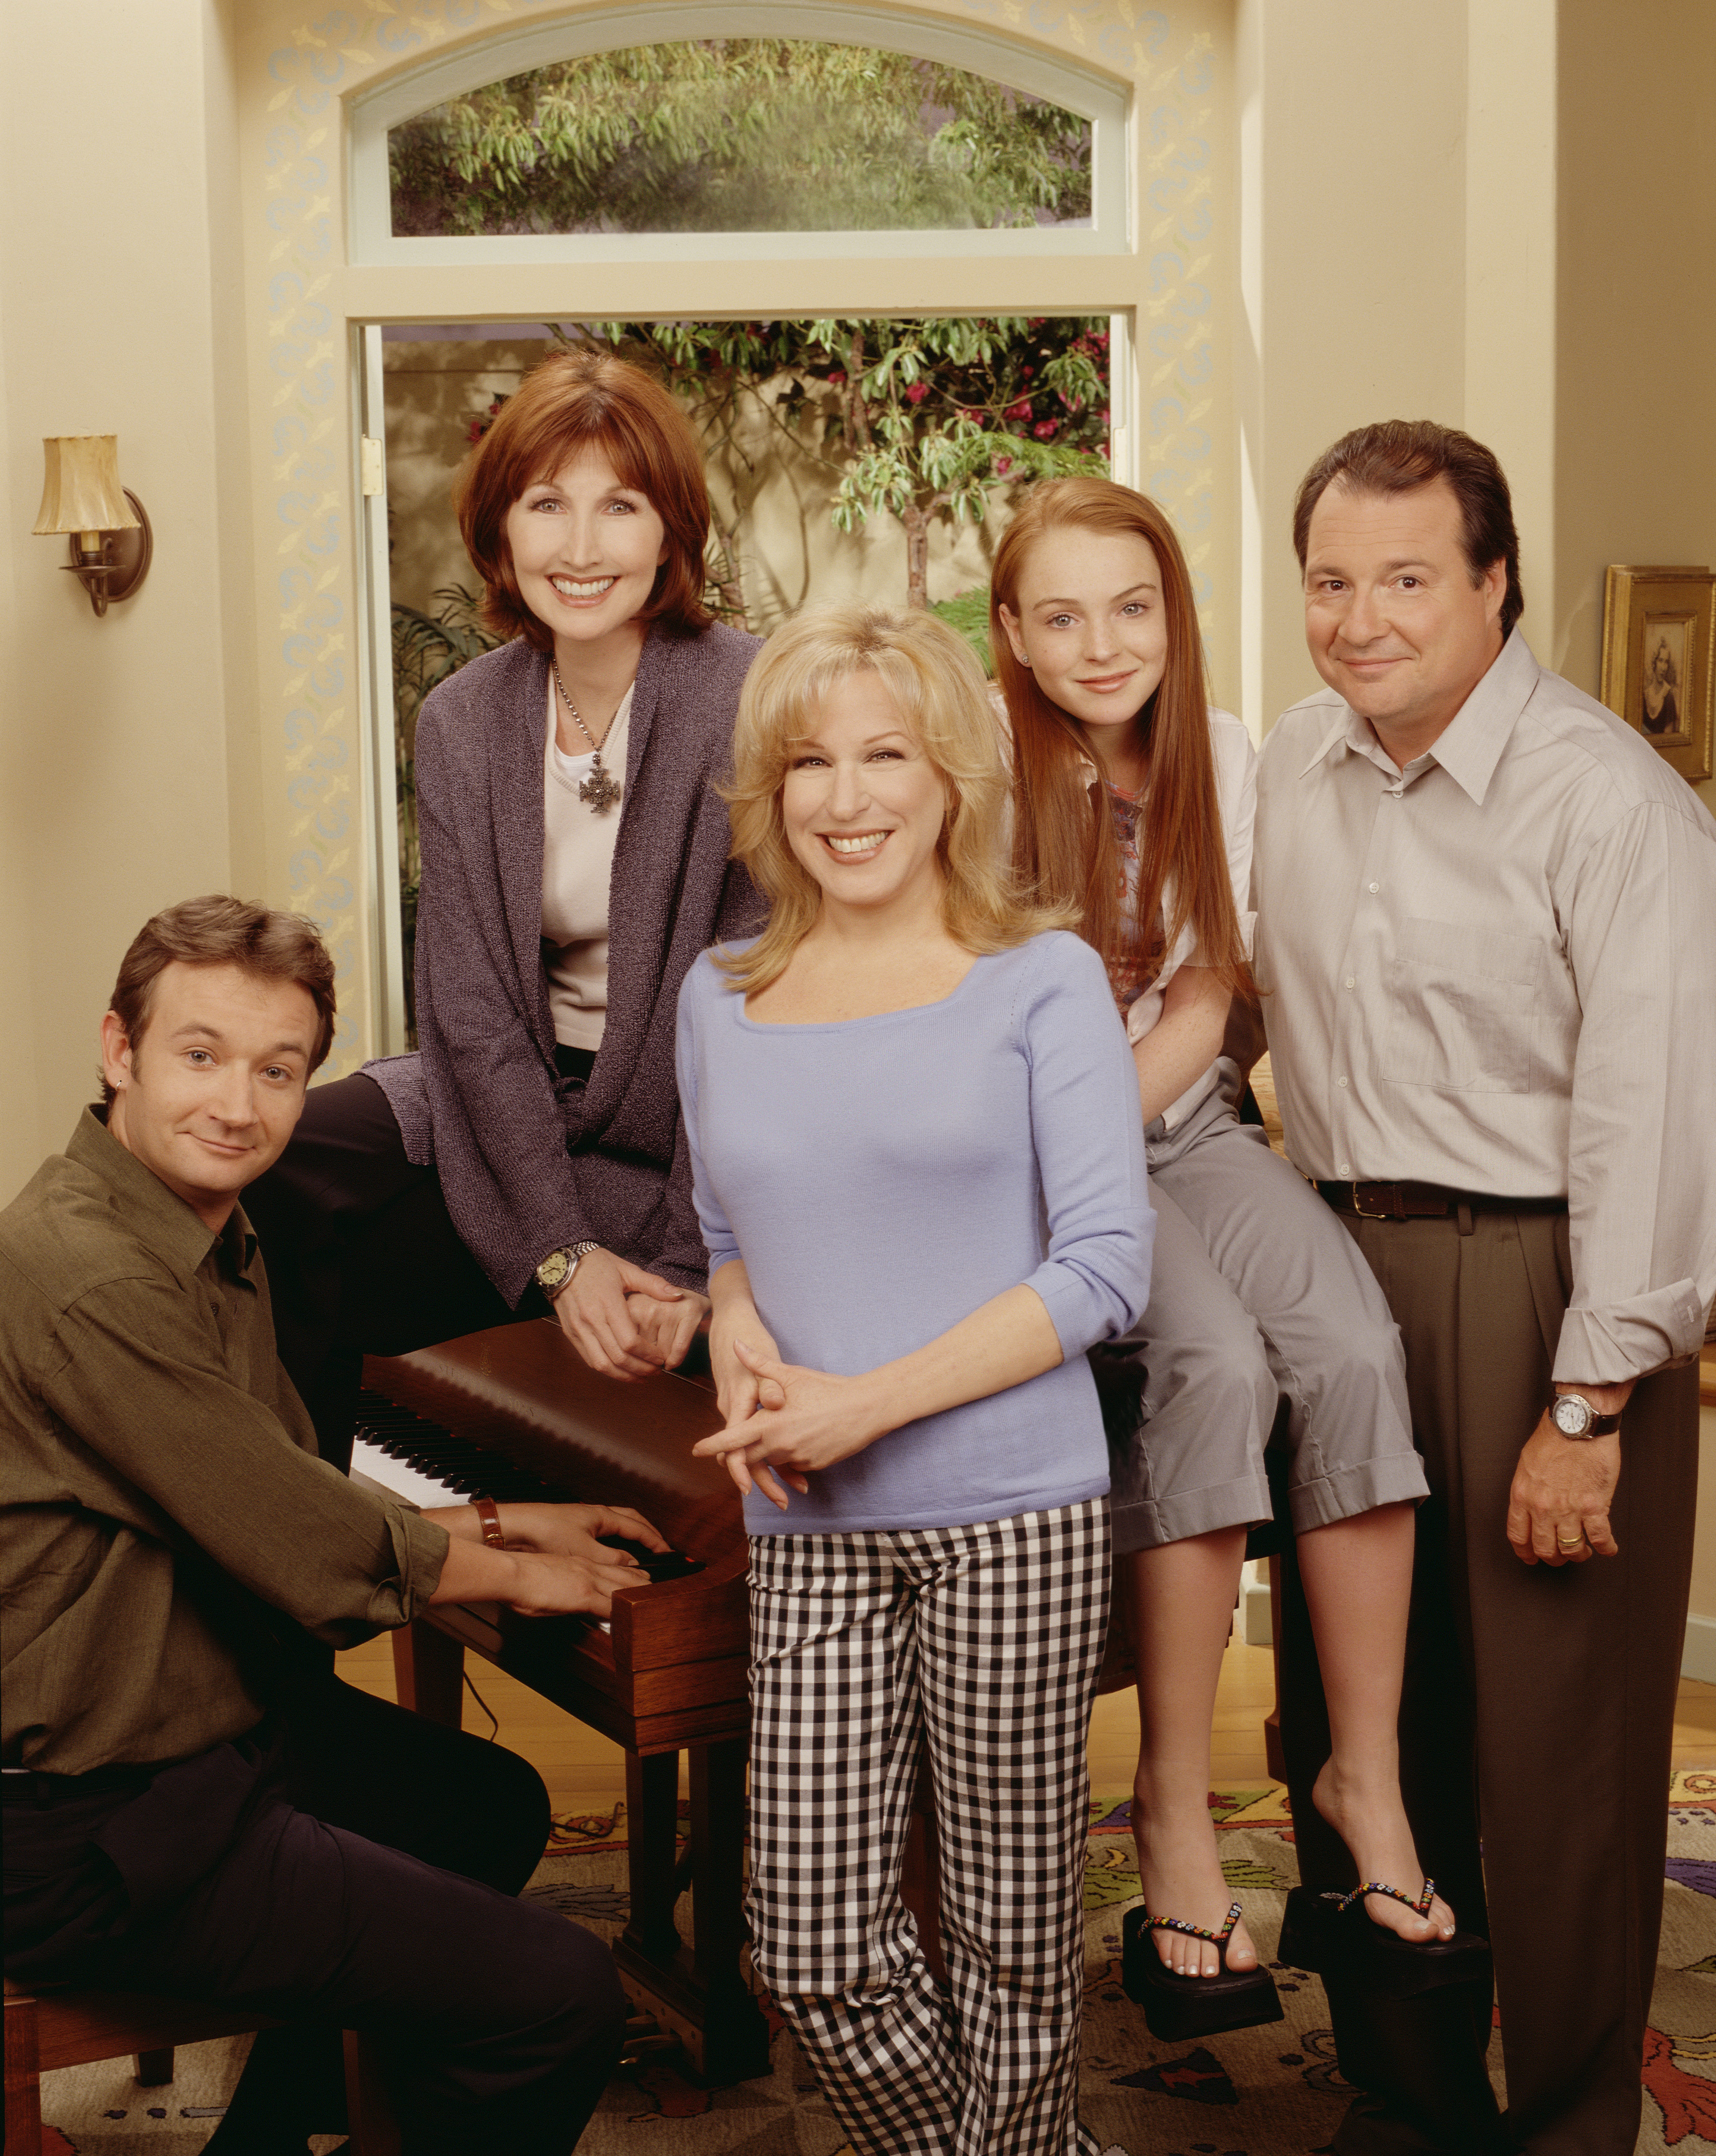 Bette premiered on CBS in 2000, lasting only 18 episodes before being canceled